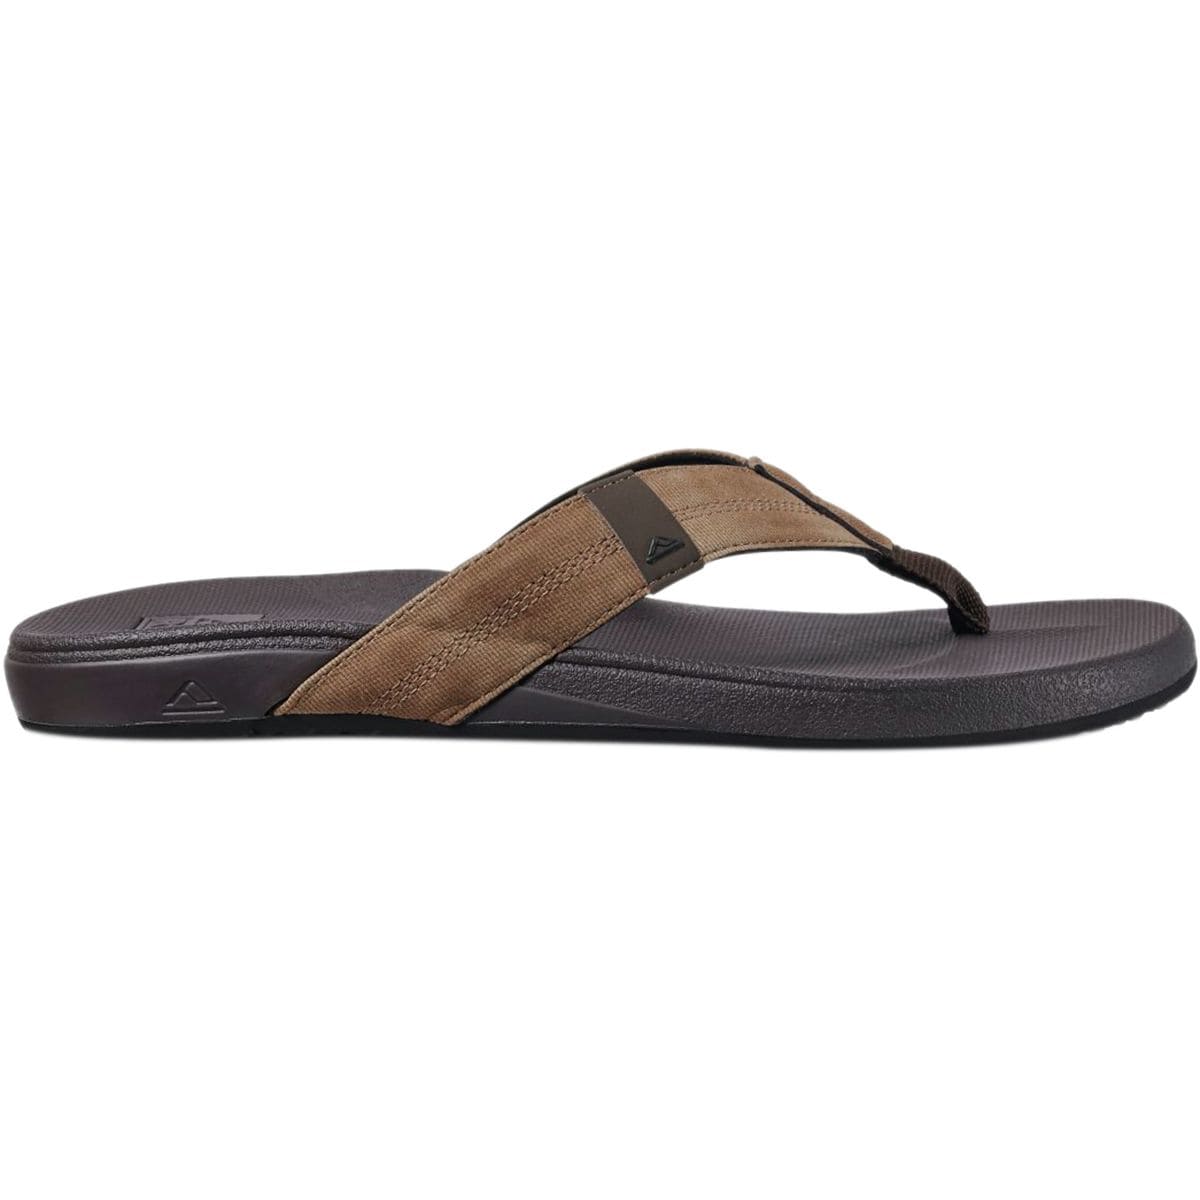 R RED, 10 UK: S & Bags, Reef Men's Cn Pm Flip-Flop 24 hours to serve ...